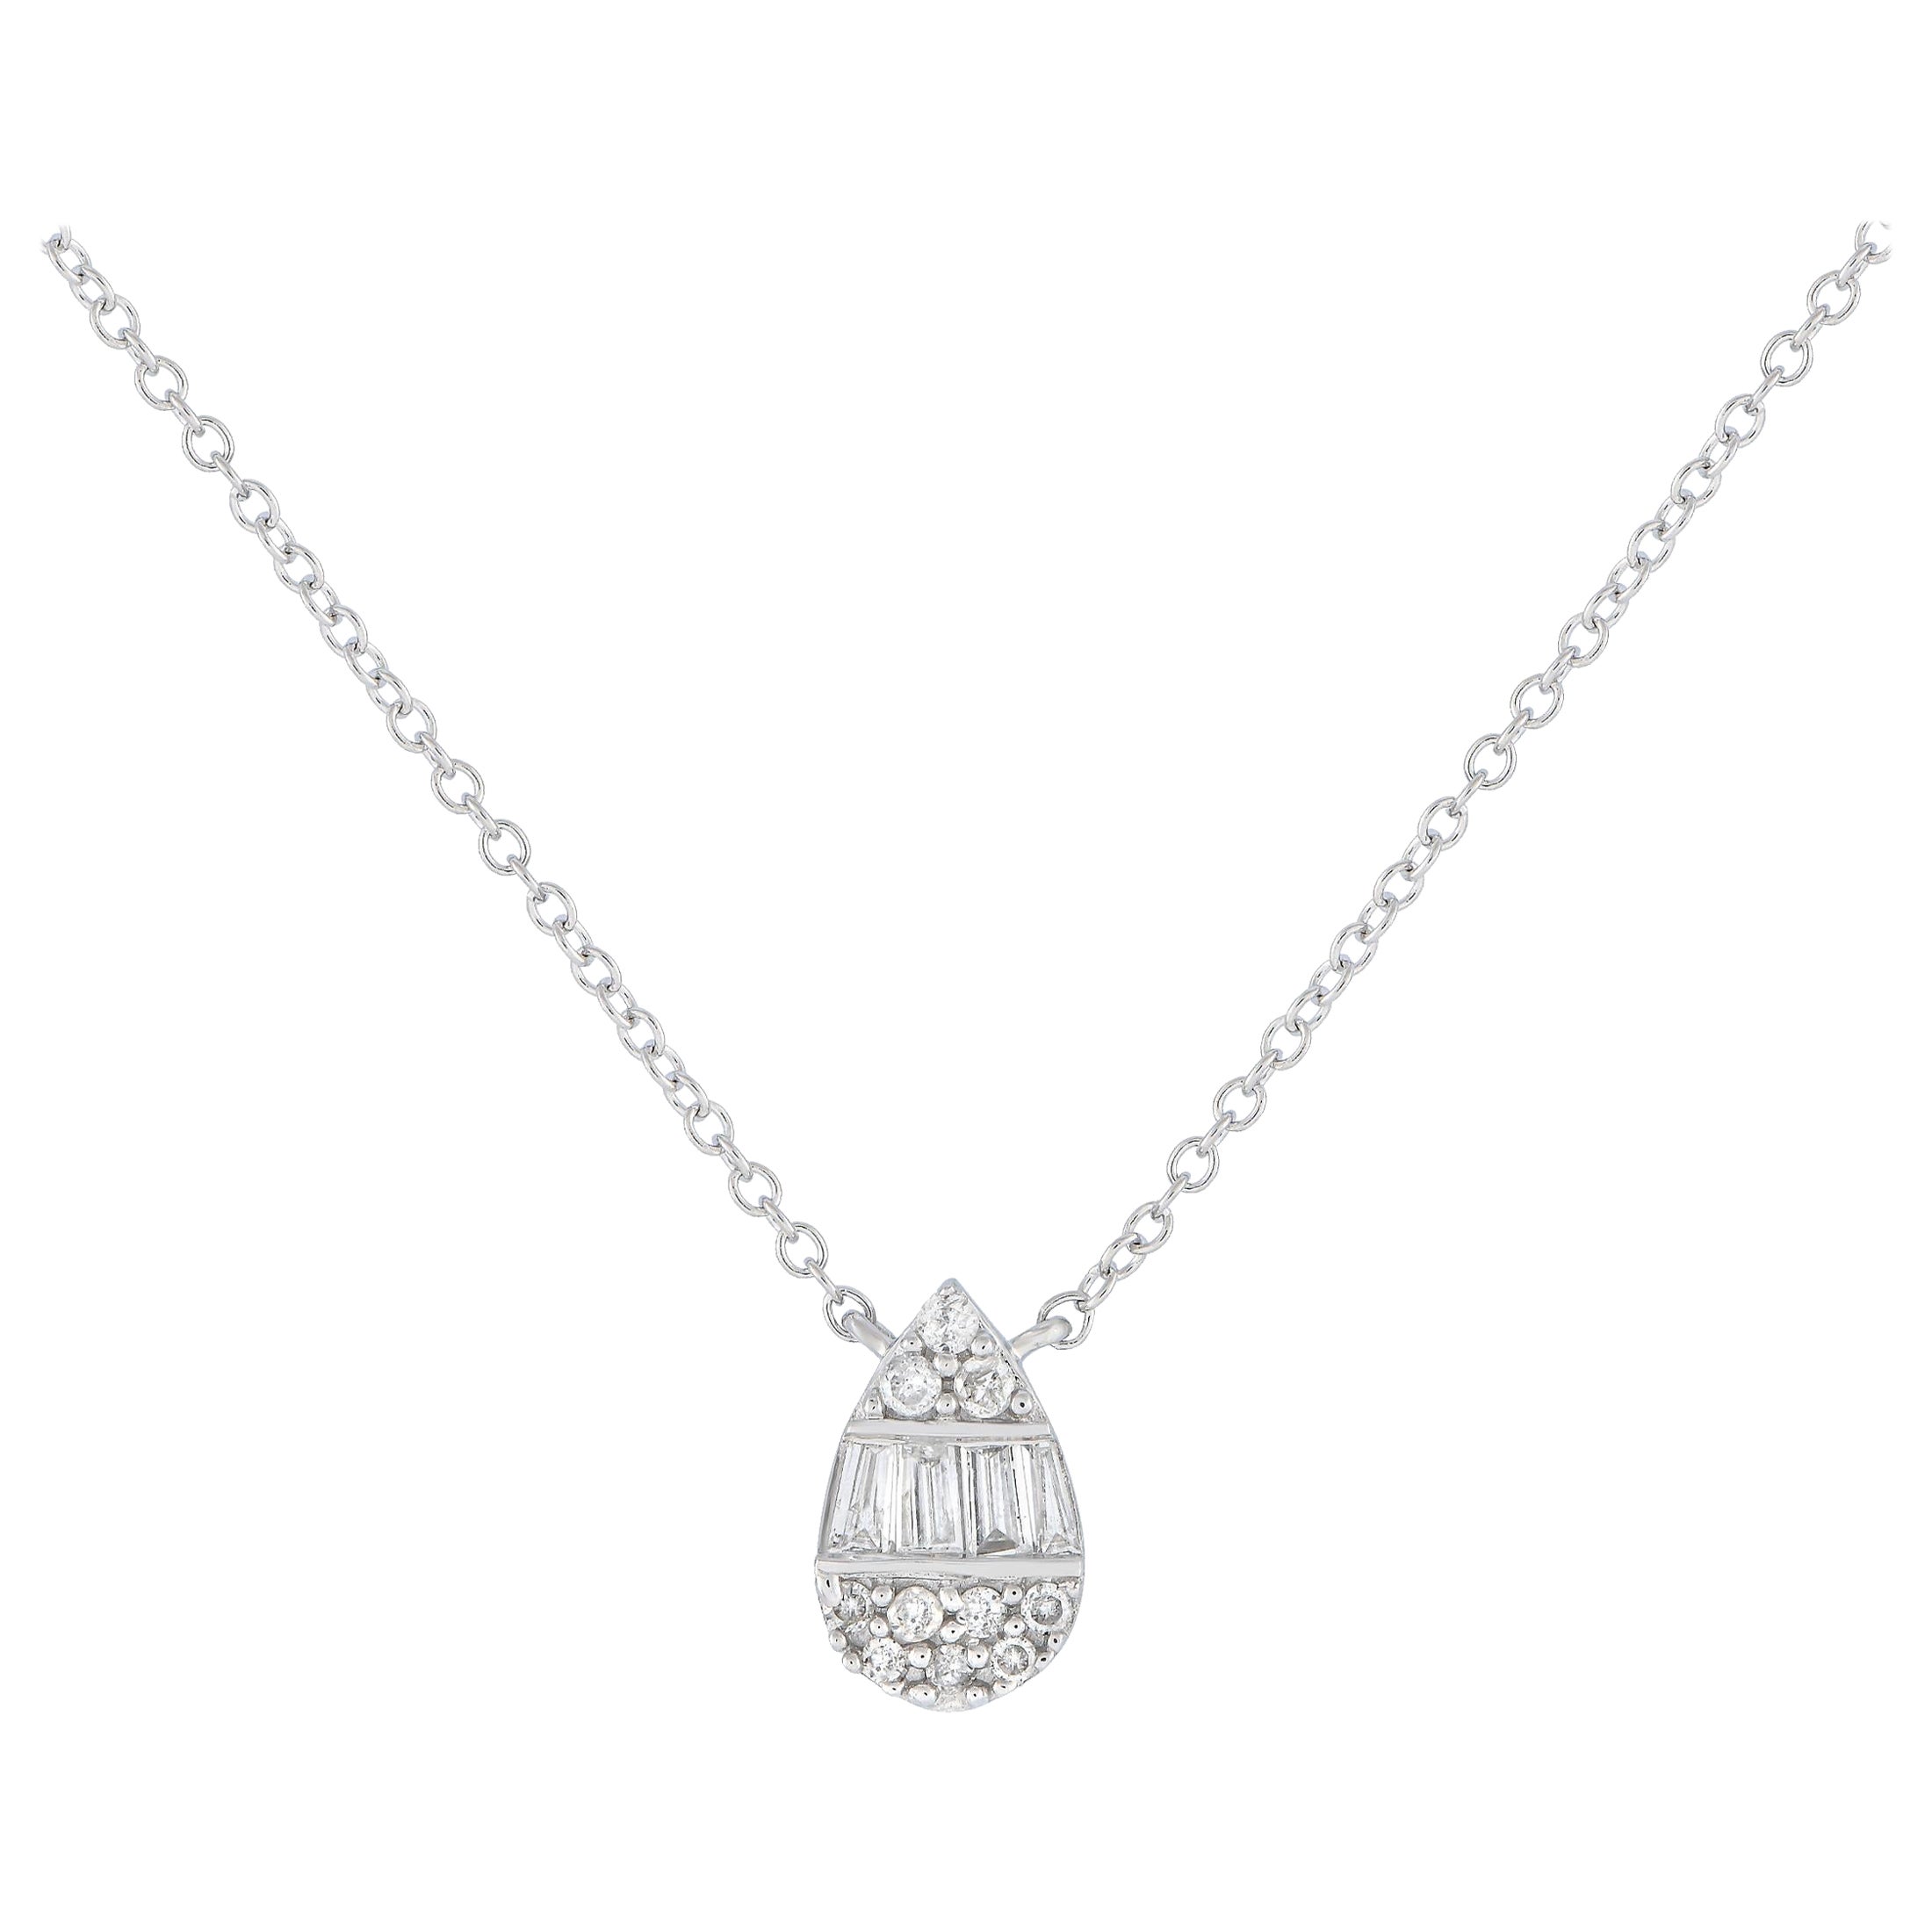 14K White Gold 0.15ct Diamond Pear Necklace PN15162-W For Sale